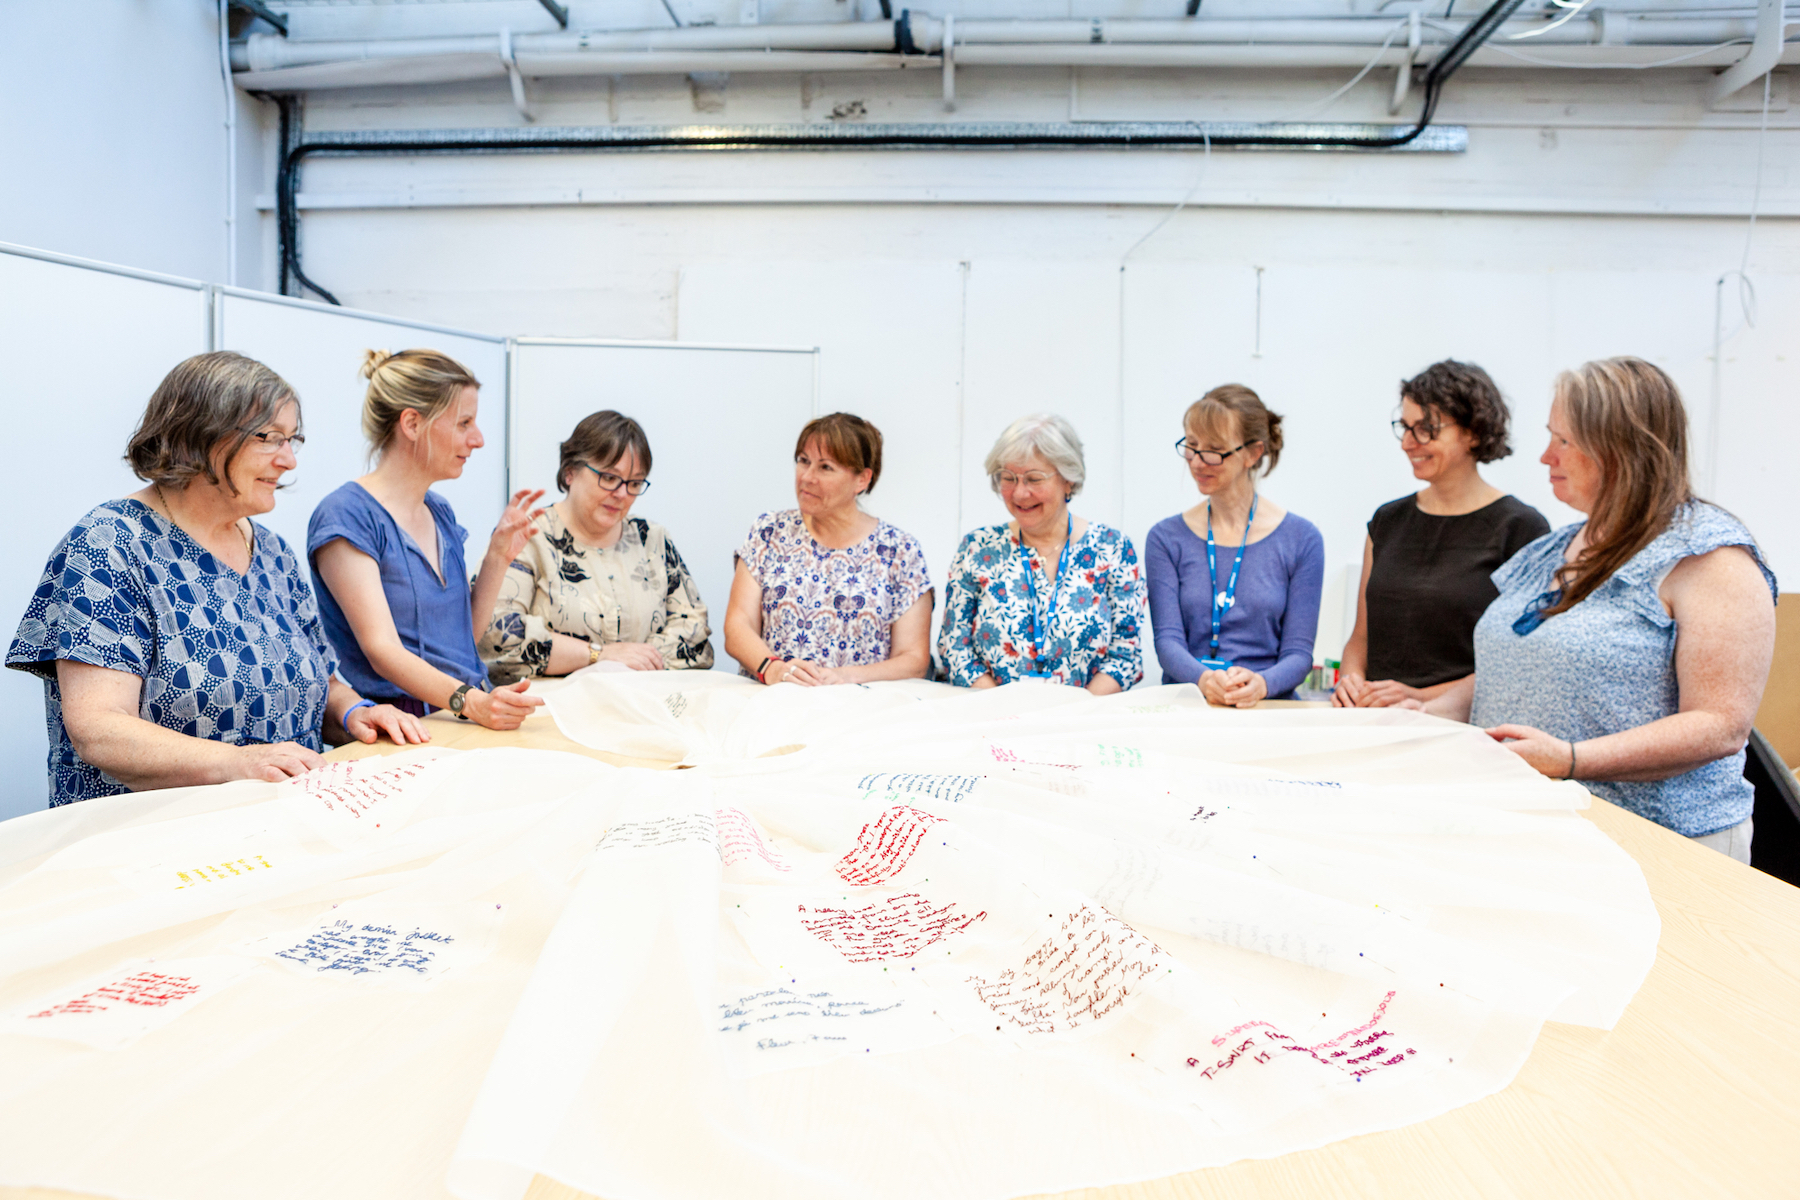 Students Lend Embroidery Skills for Museum’s Interactive Artwork